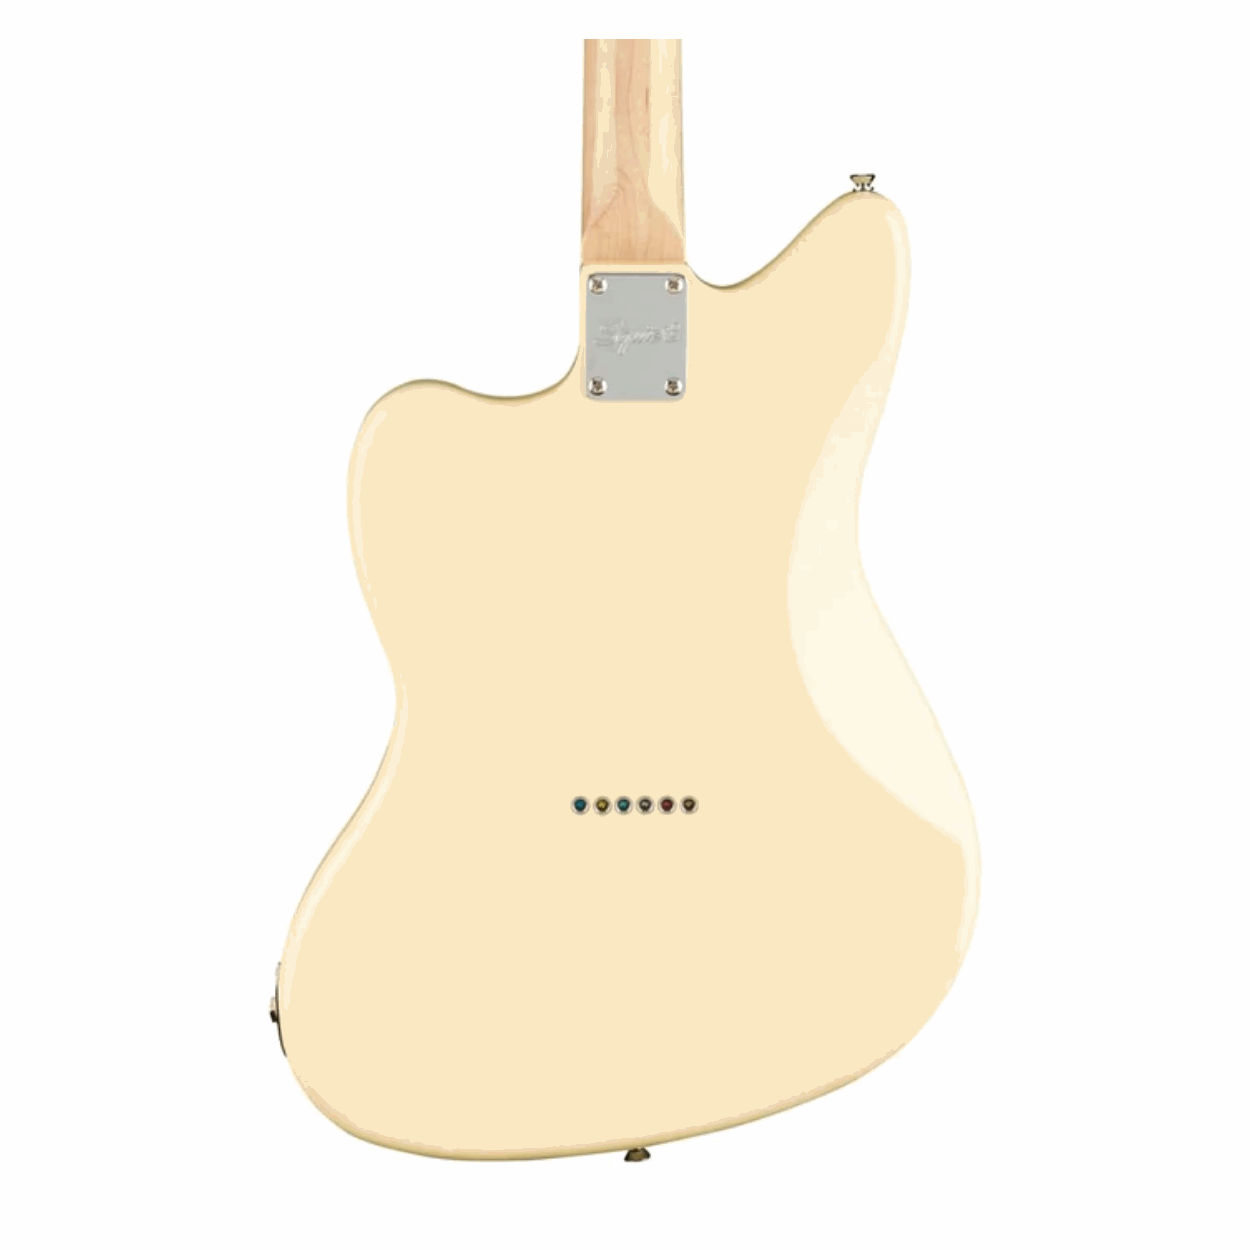 Squier Paranormal Series Offset Telecaster Electric Guitar, Olympic White